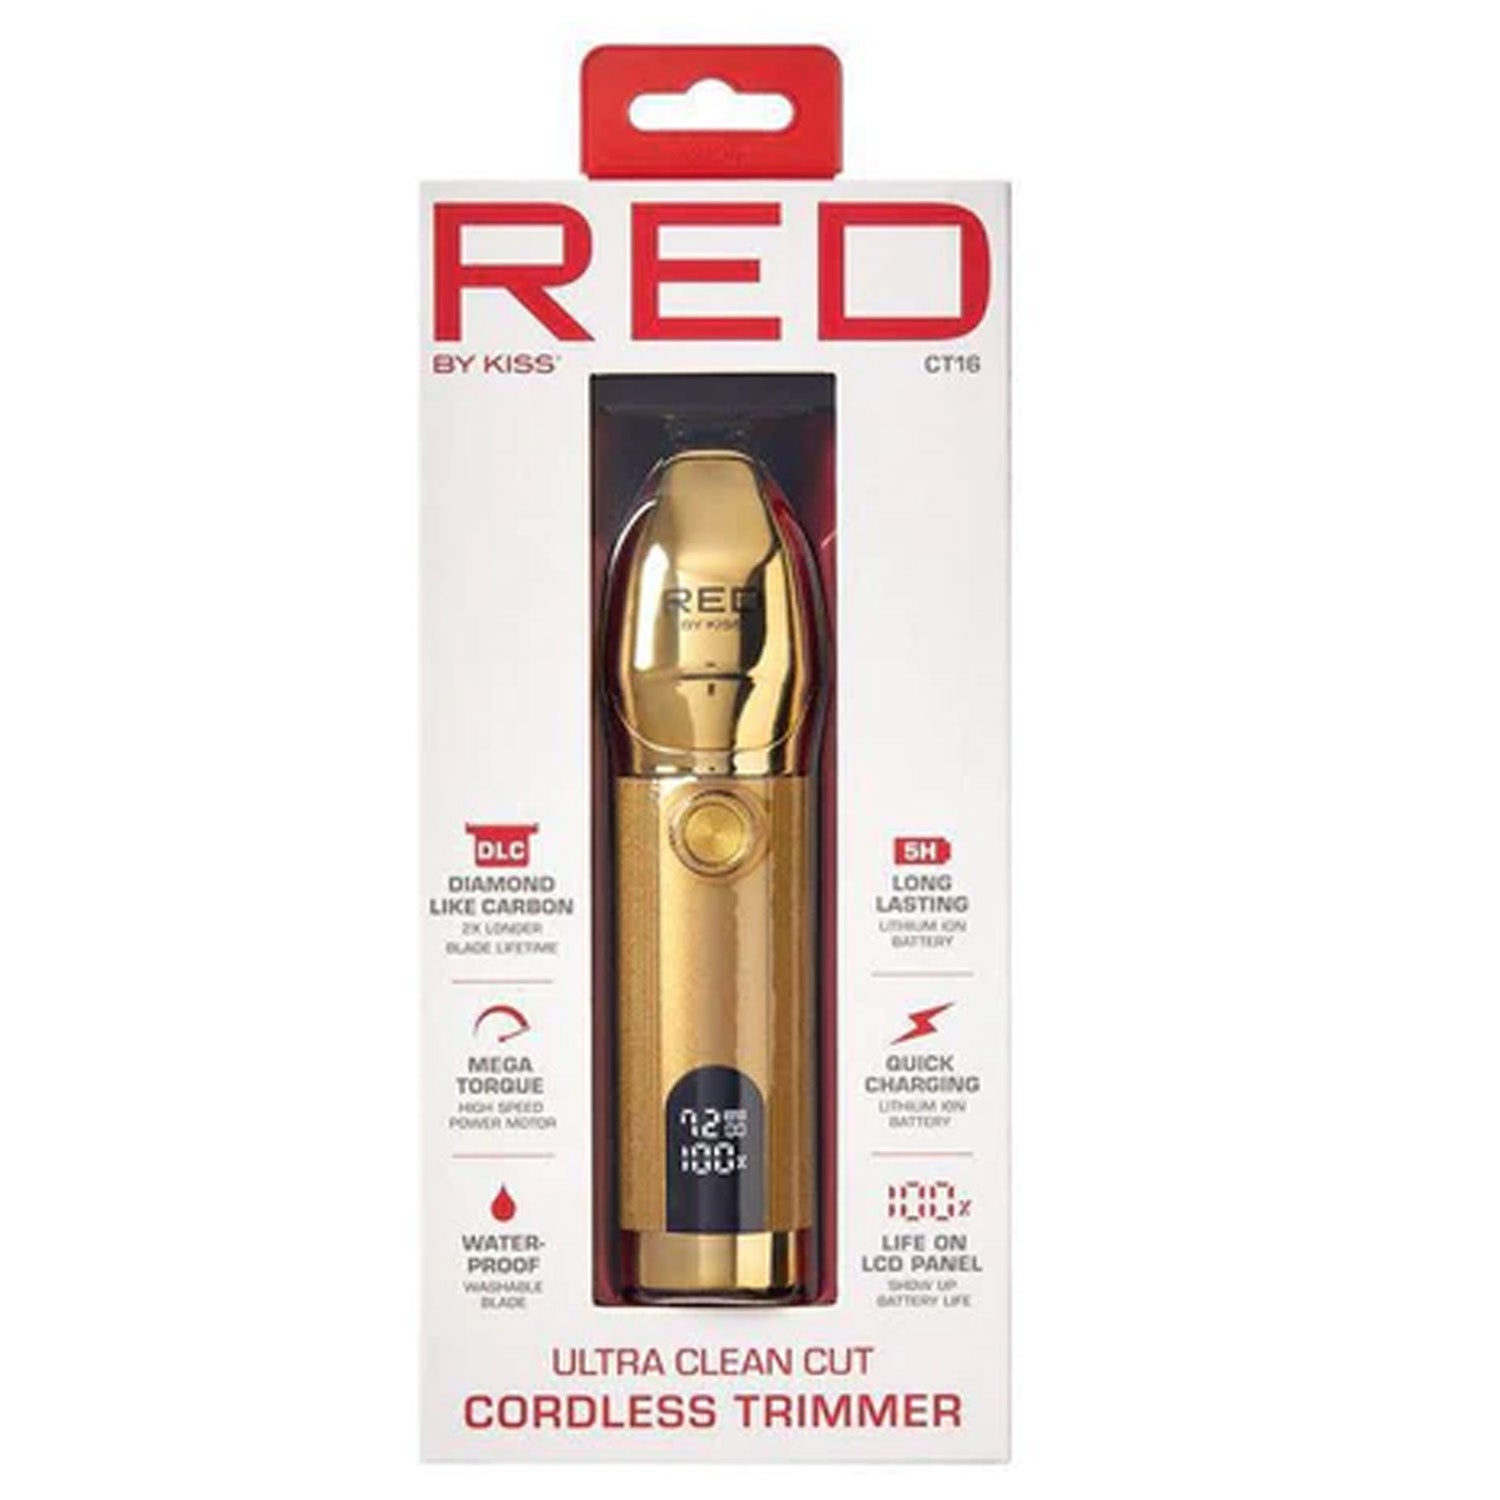 RED BY KISS ULTRA CLEAN CUT CORDLESS TRIMMER